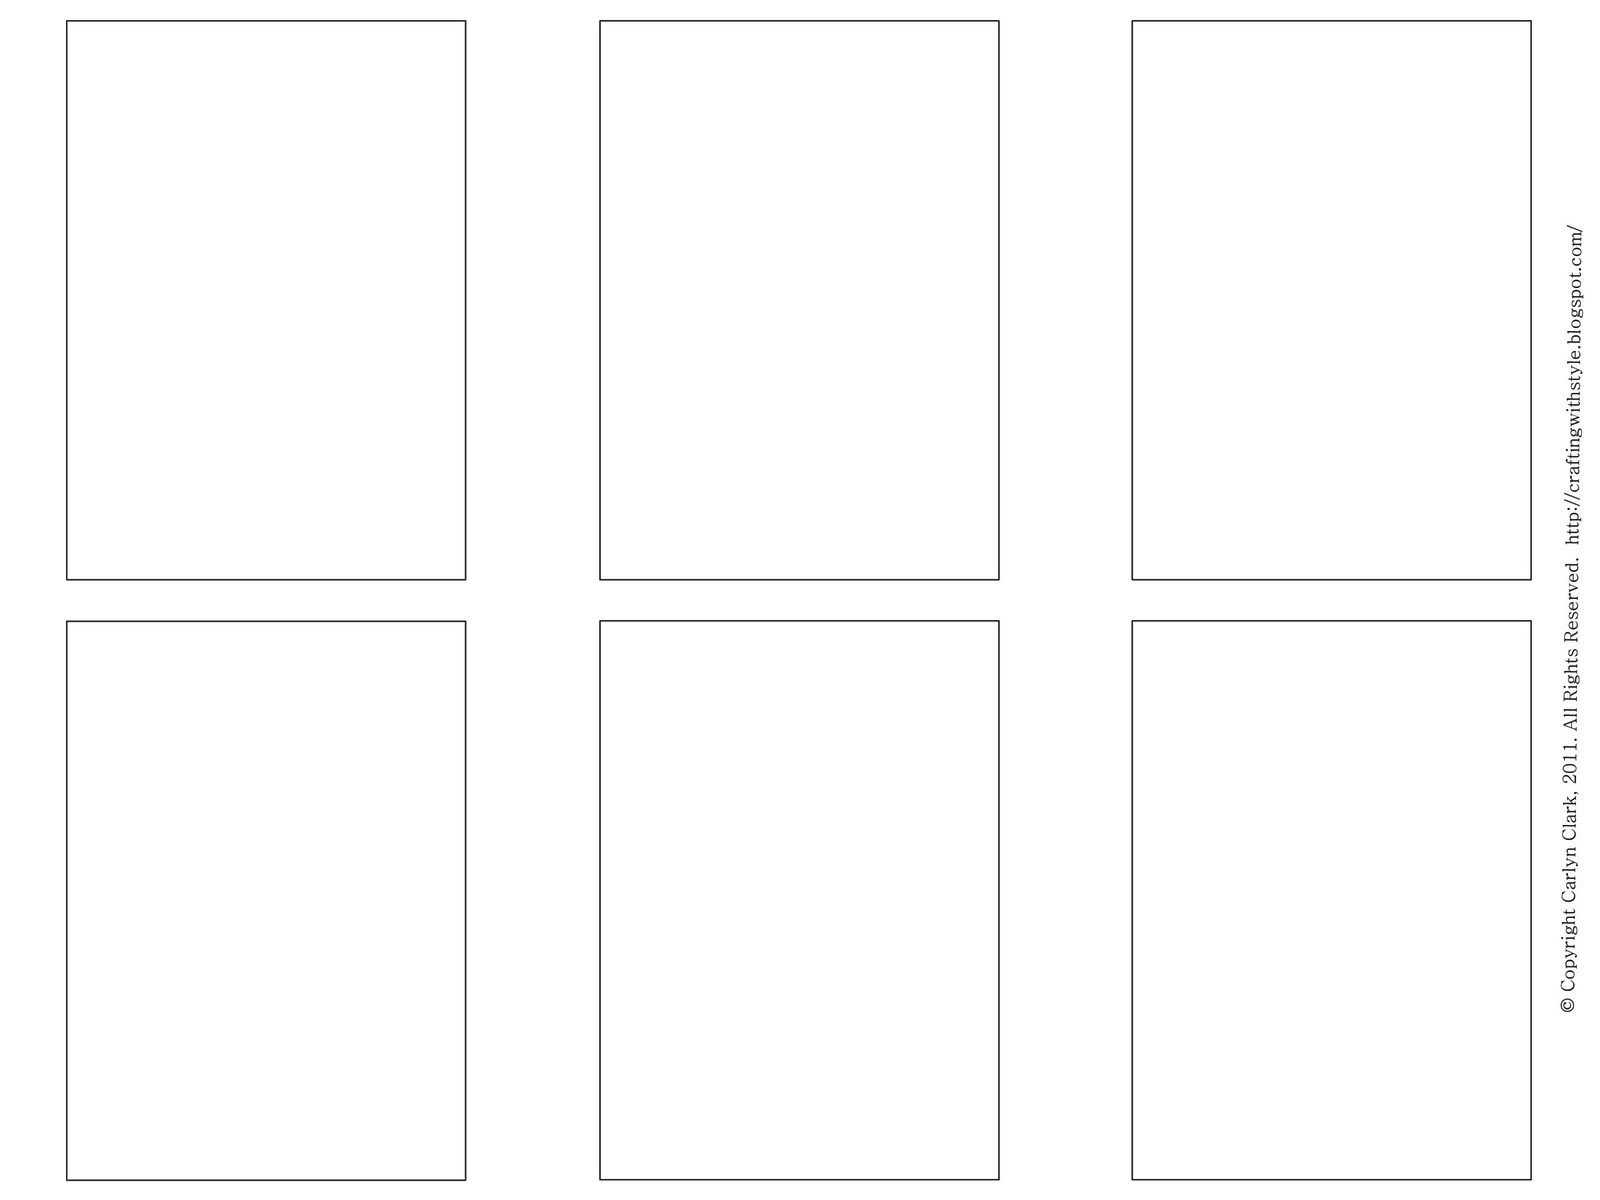 30 Free Trading Card Template Download | Simple Template Design Pertaining To Free Trading Card Template Download